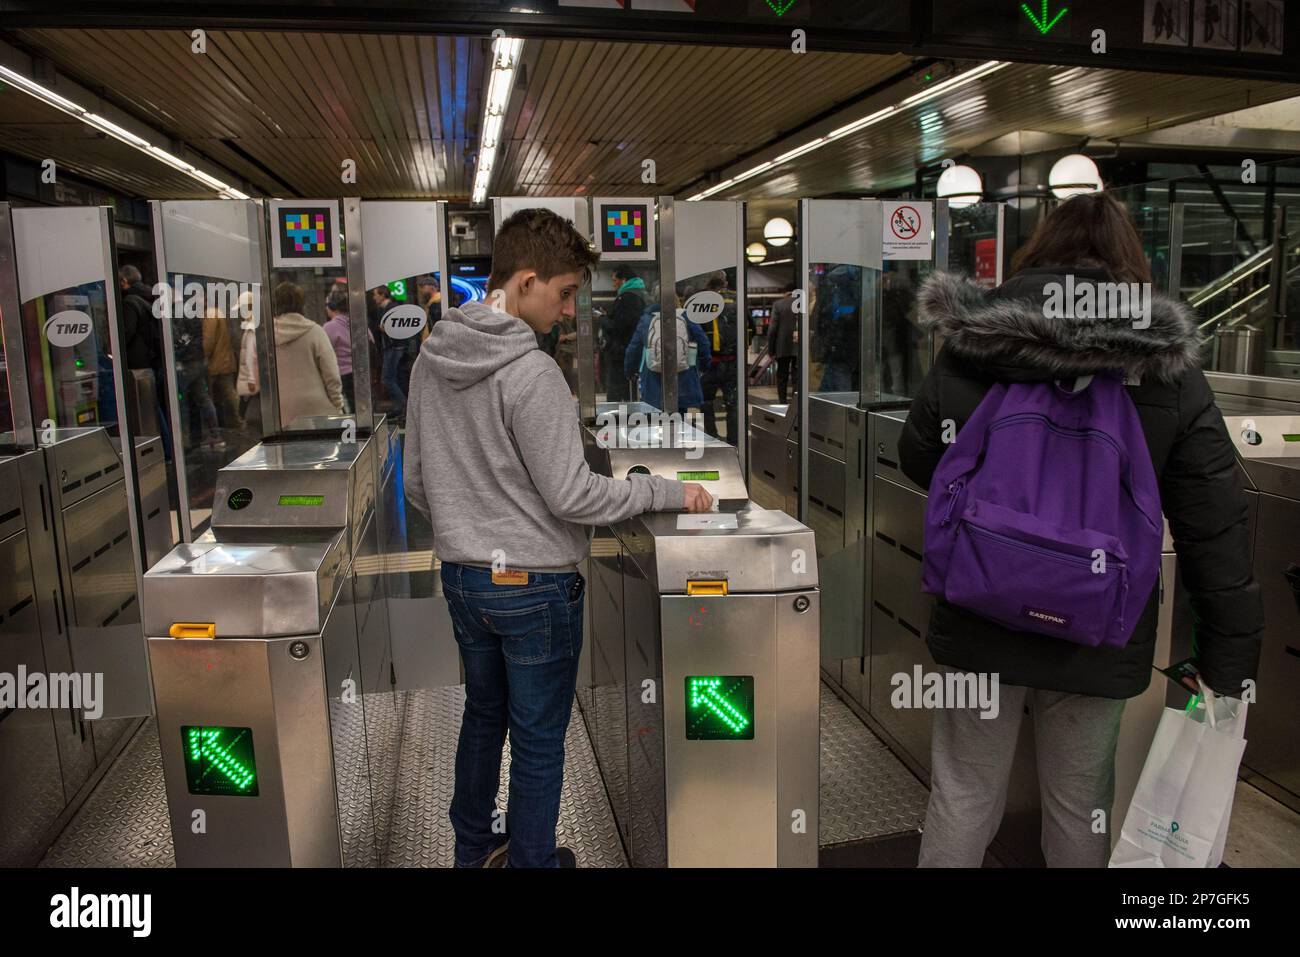 A young man introduces his subway ticket at a turnstyle to enter. Stock Photo